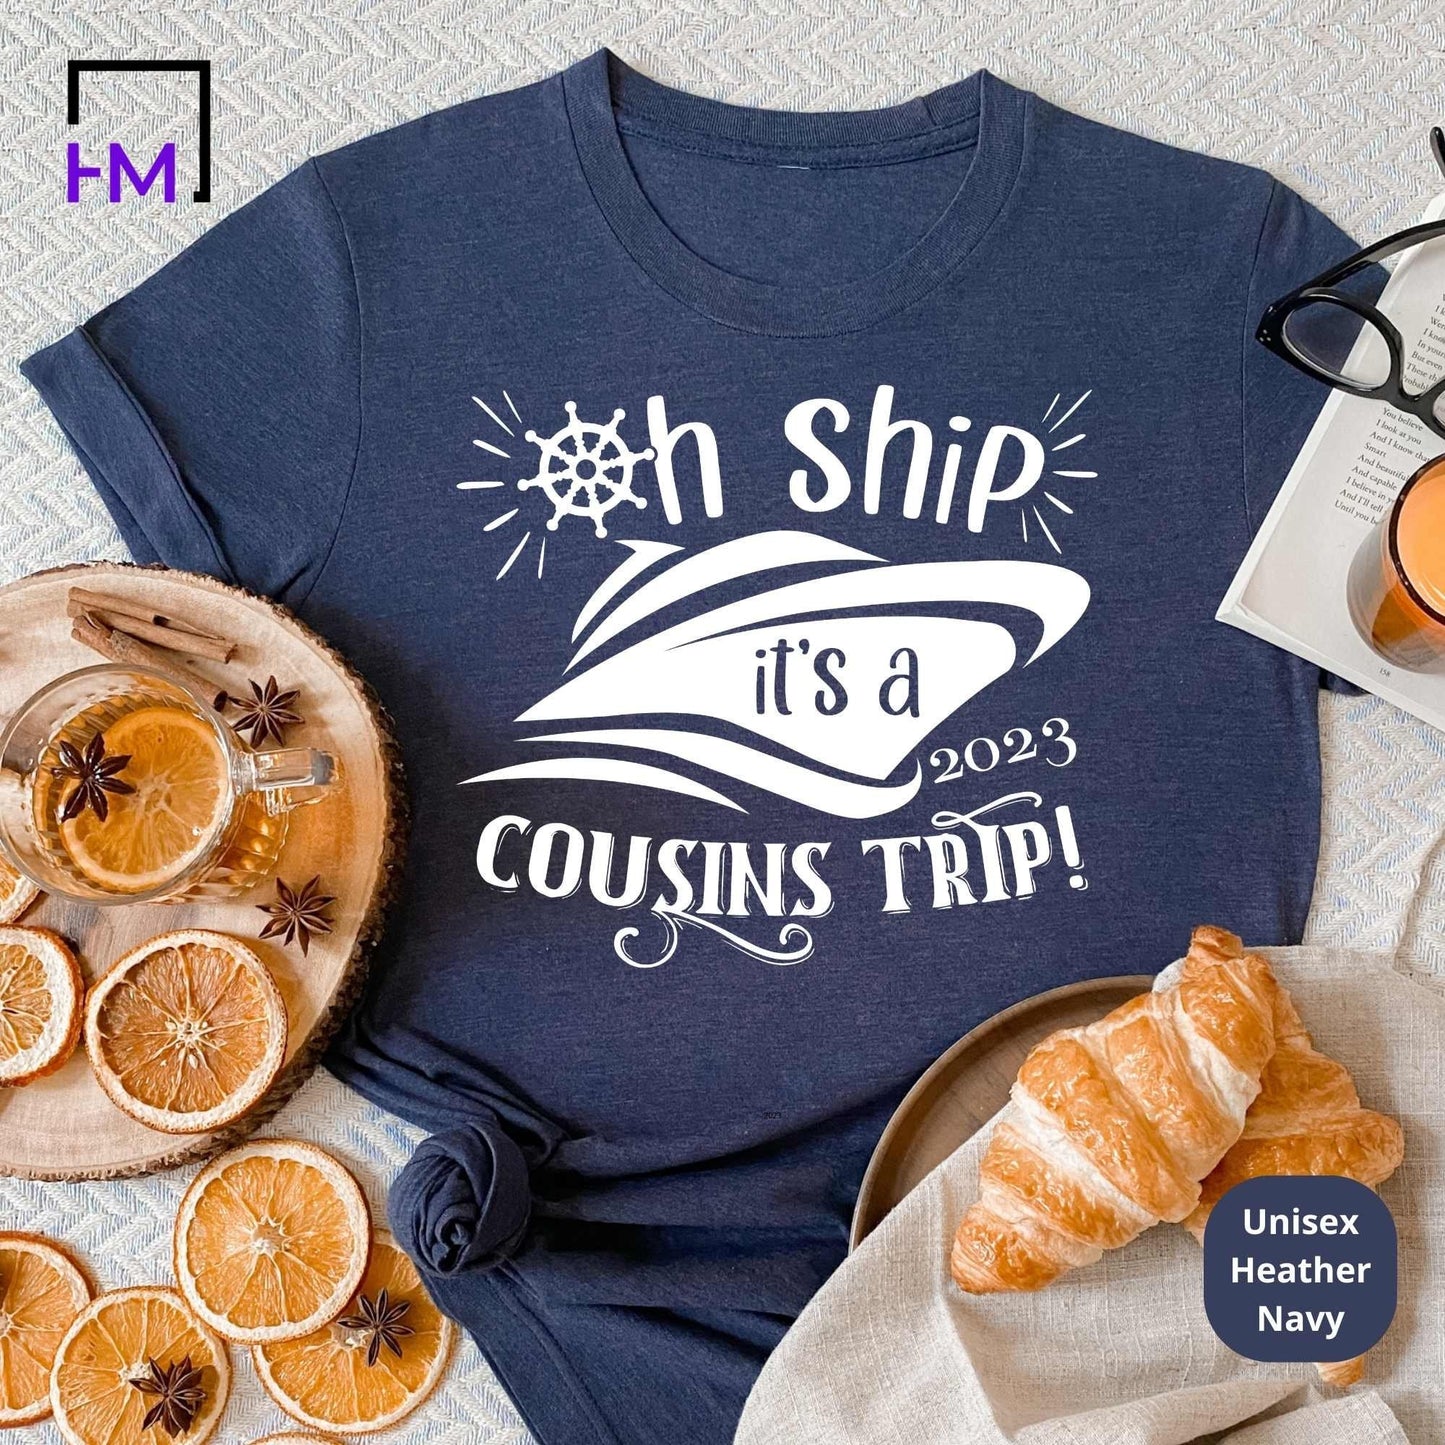 Cousin Crew Shirts, 2023 Cousins Cruise T-shirts, Matching Family Vacation Tees, Cousin gifts, Christmas Cousin Girls or Guys Holiday Trip HMDesignStudioUS